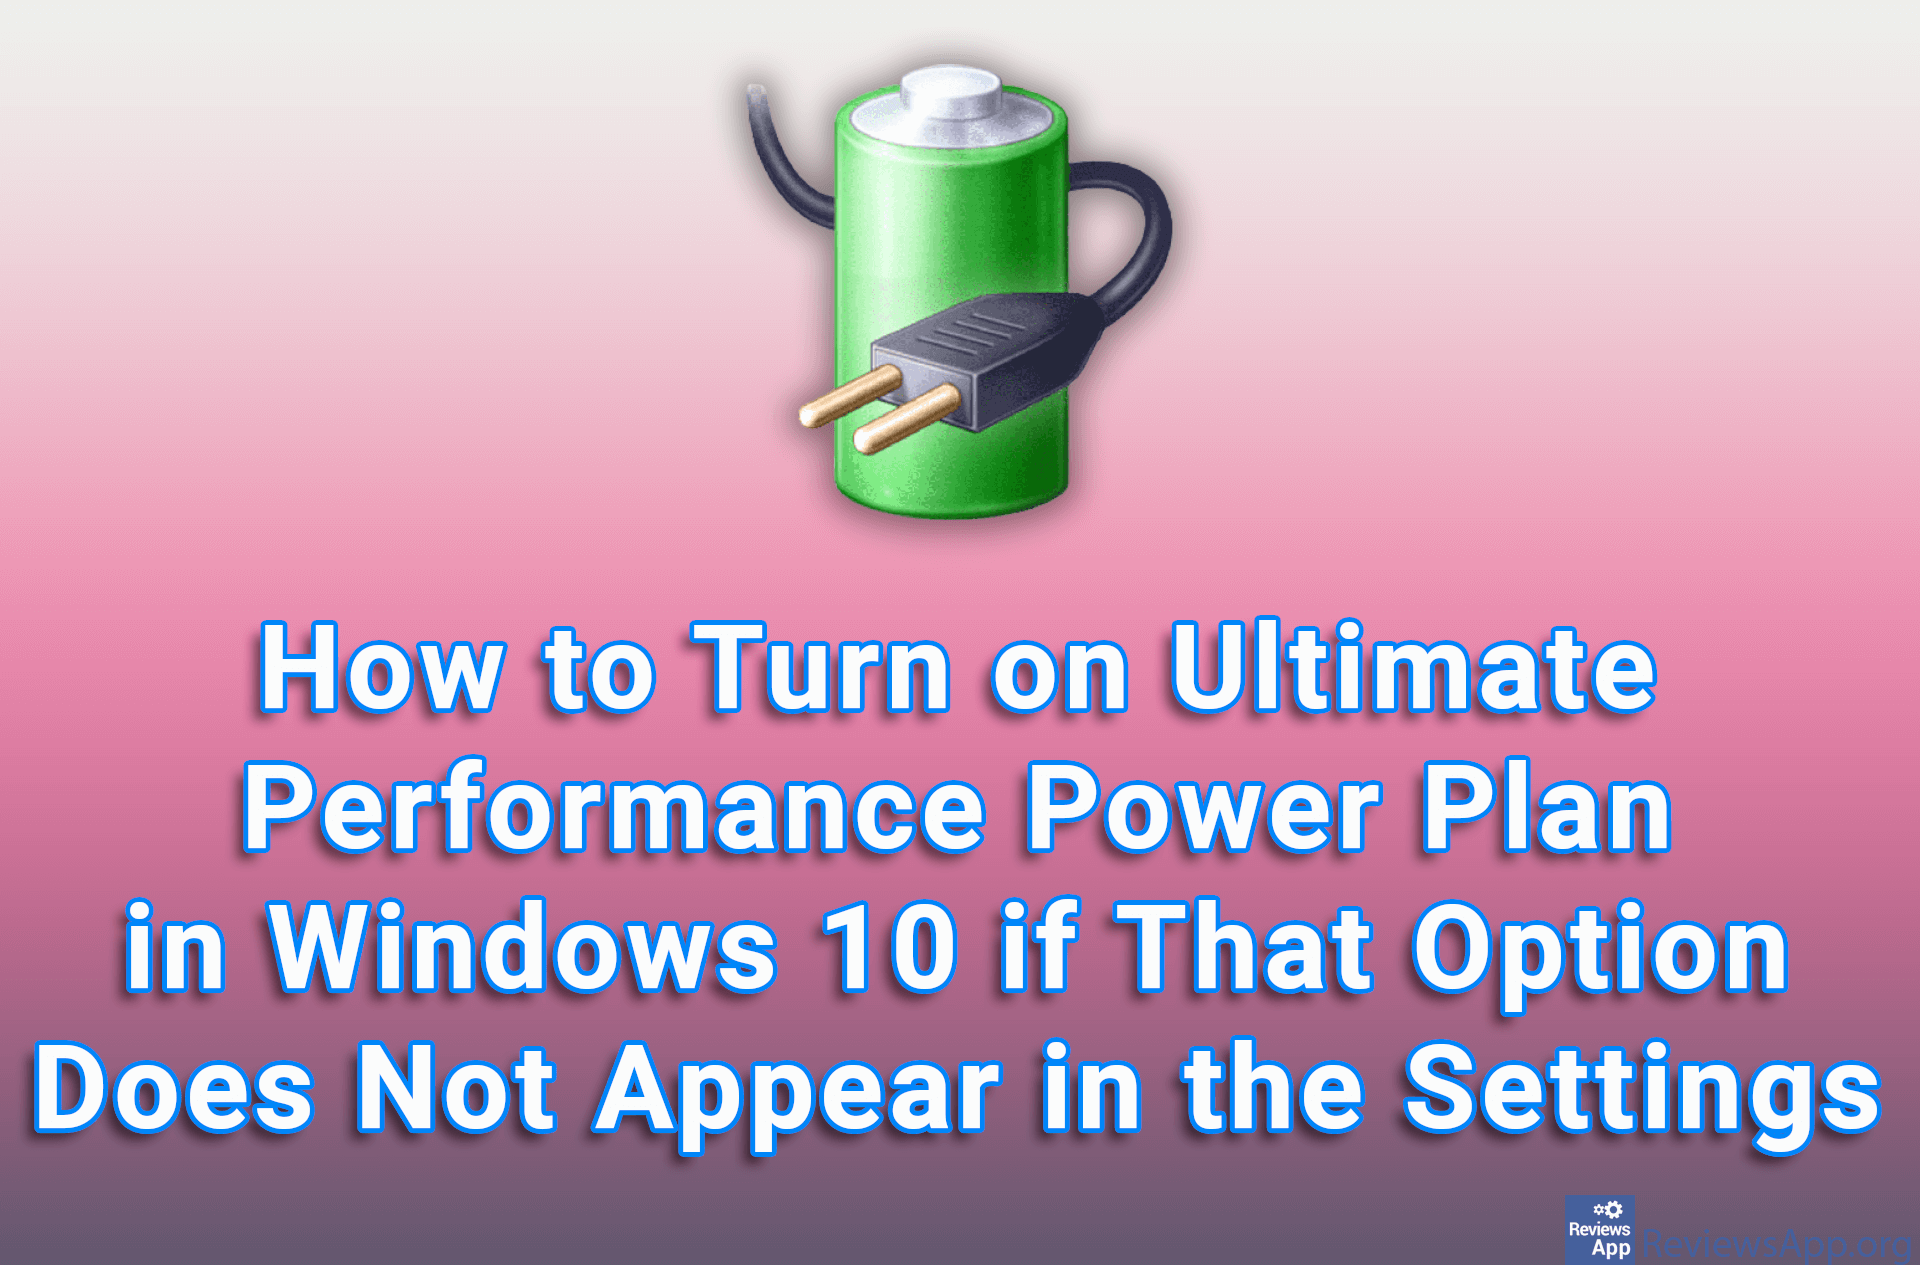 How to Turn on Ultimate Performance Power Plan in Windows 10 if That Option Does Not Appear in the Settings